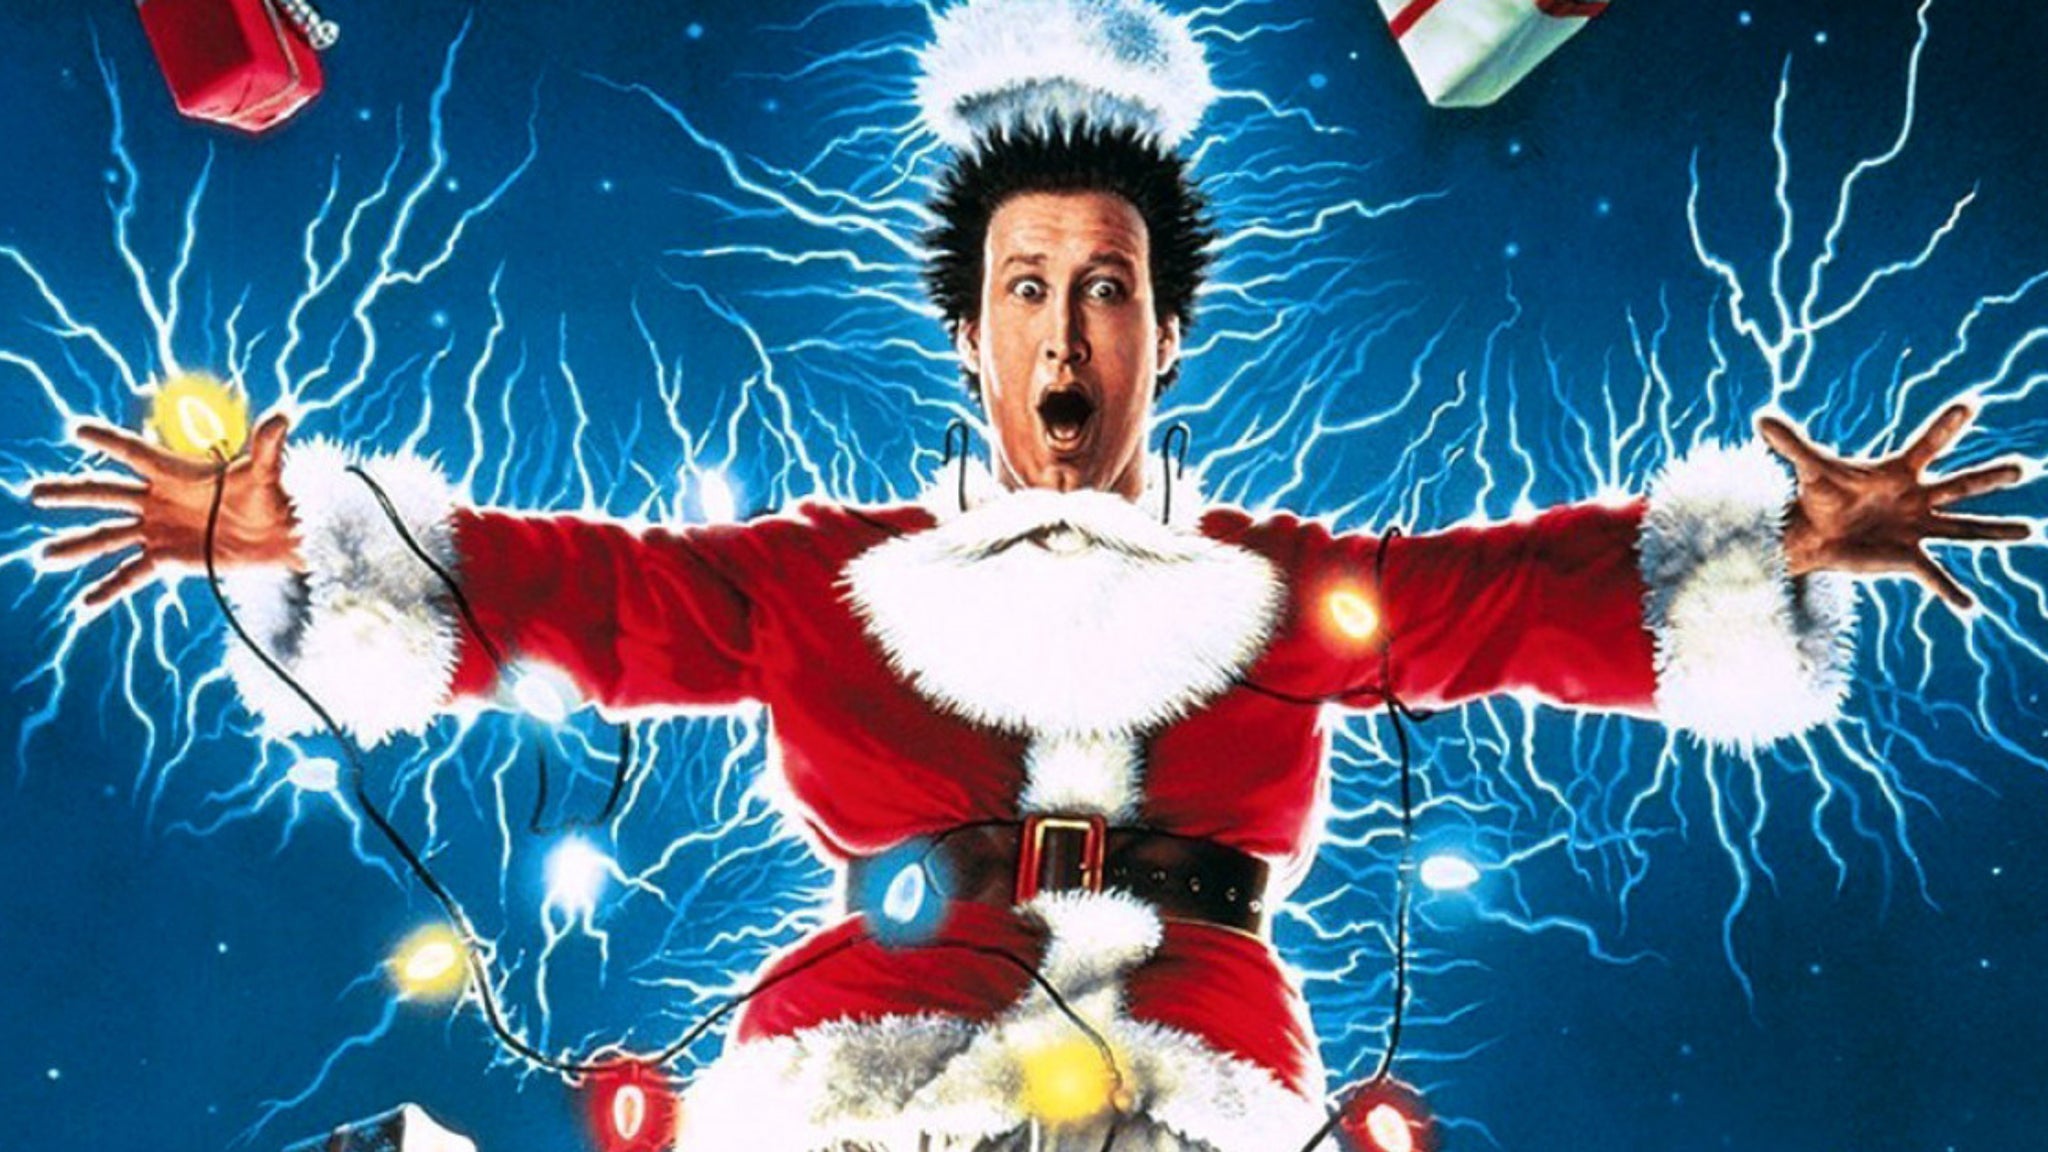 exclusive presale code for National Lampoon's Christmas Vacation - Movie and Q&A w/ Chevy Chase presale tickets in Mashantucket at Great Cedar Showroom at Foxwoods Resort Casino